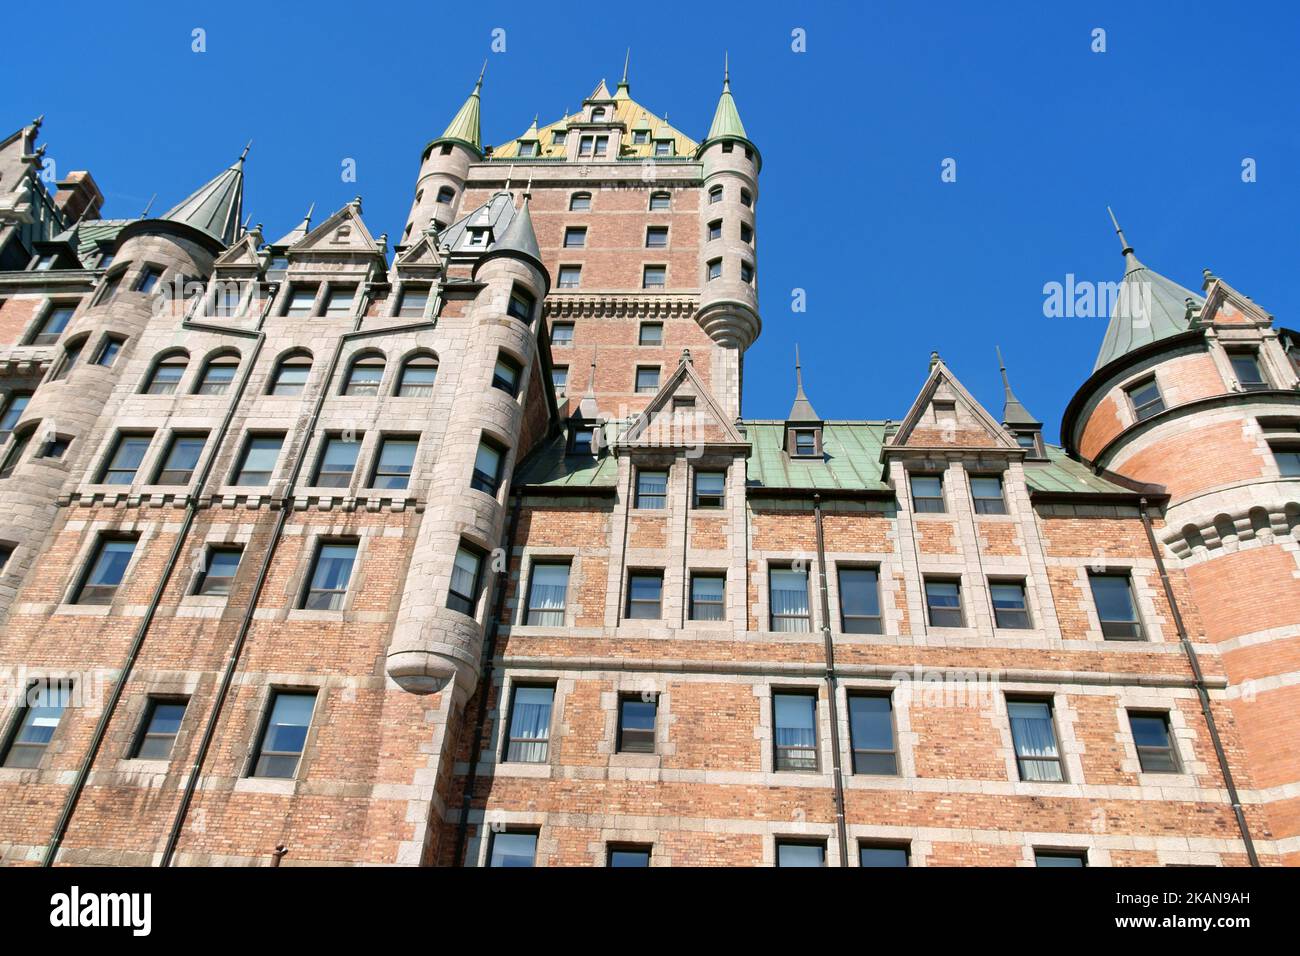 The central tower of Chateau Frontenac in Quebec City,  Quebec, Canada. This castle like hotel was designed by architect Bruce Price. Stock Photo